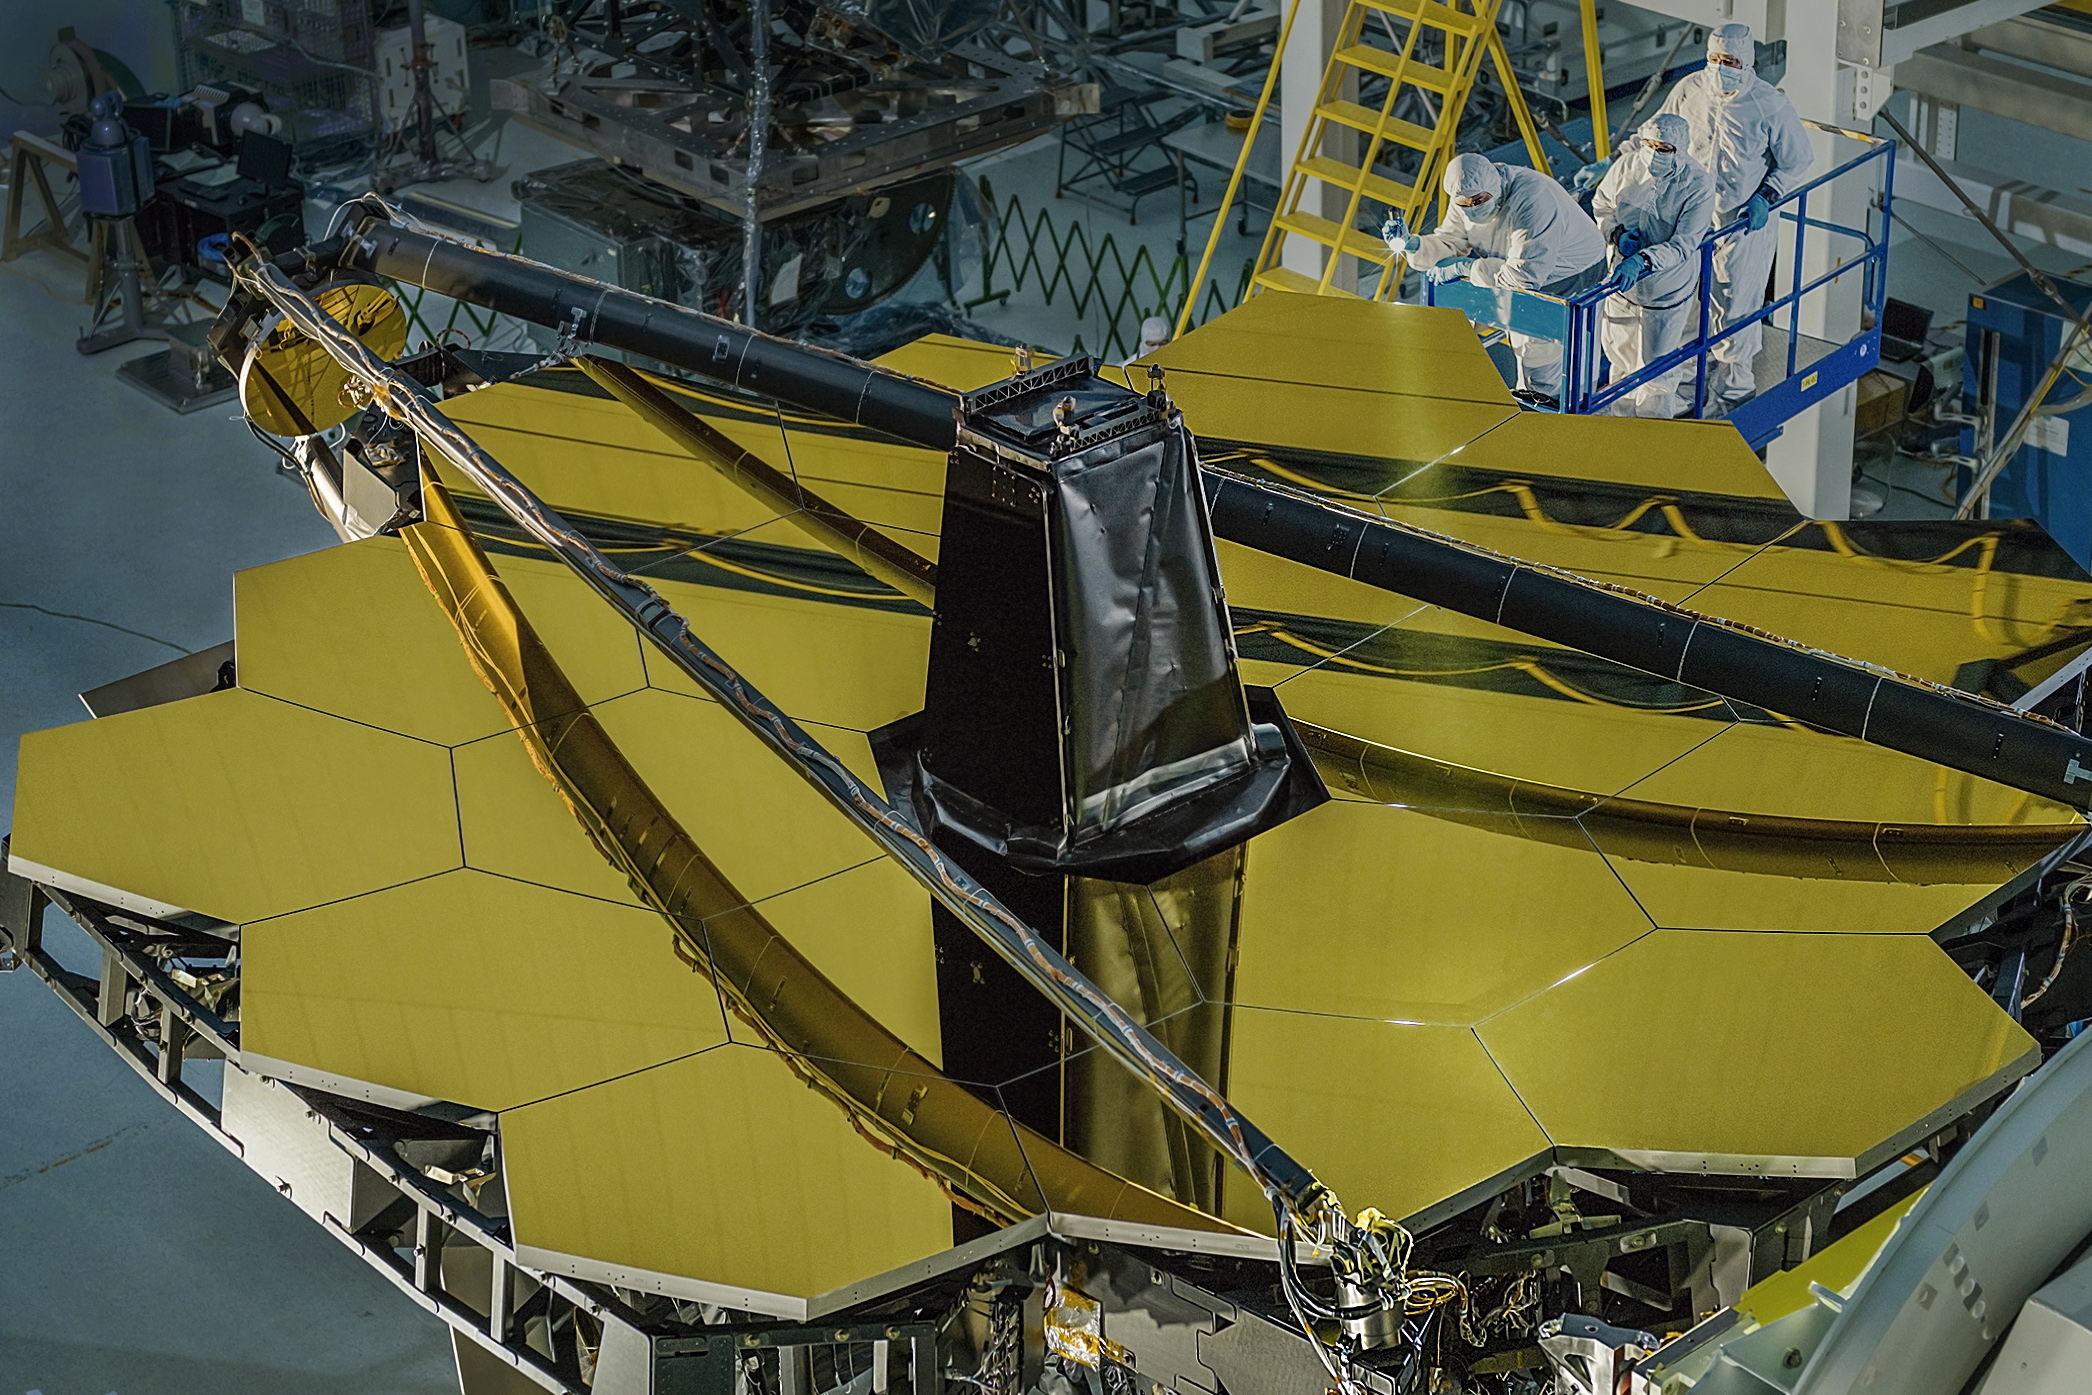 A image of James Webb Space Telescope's primary mirror at NASA Goddard.